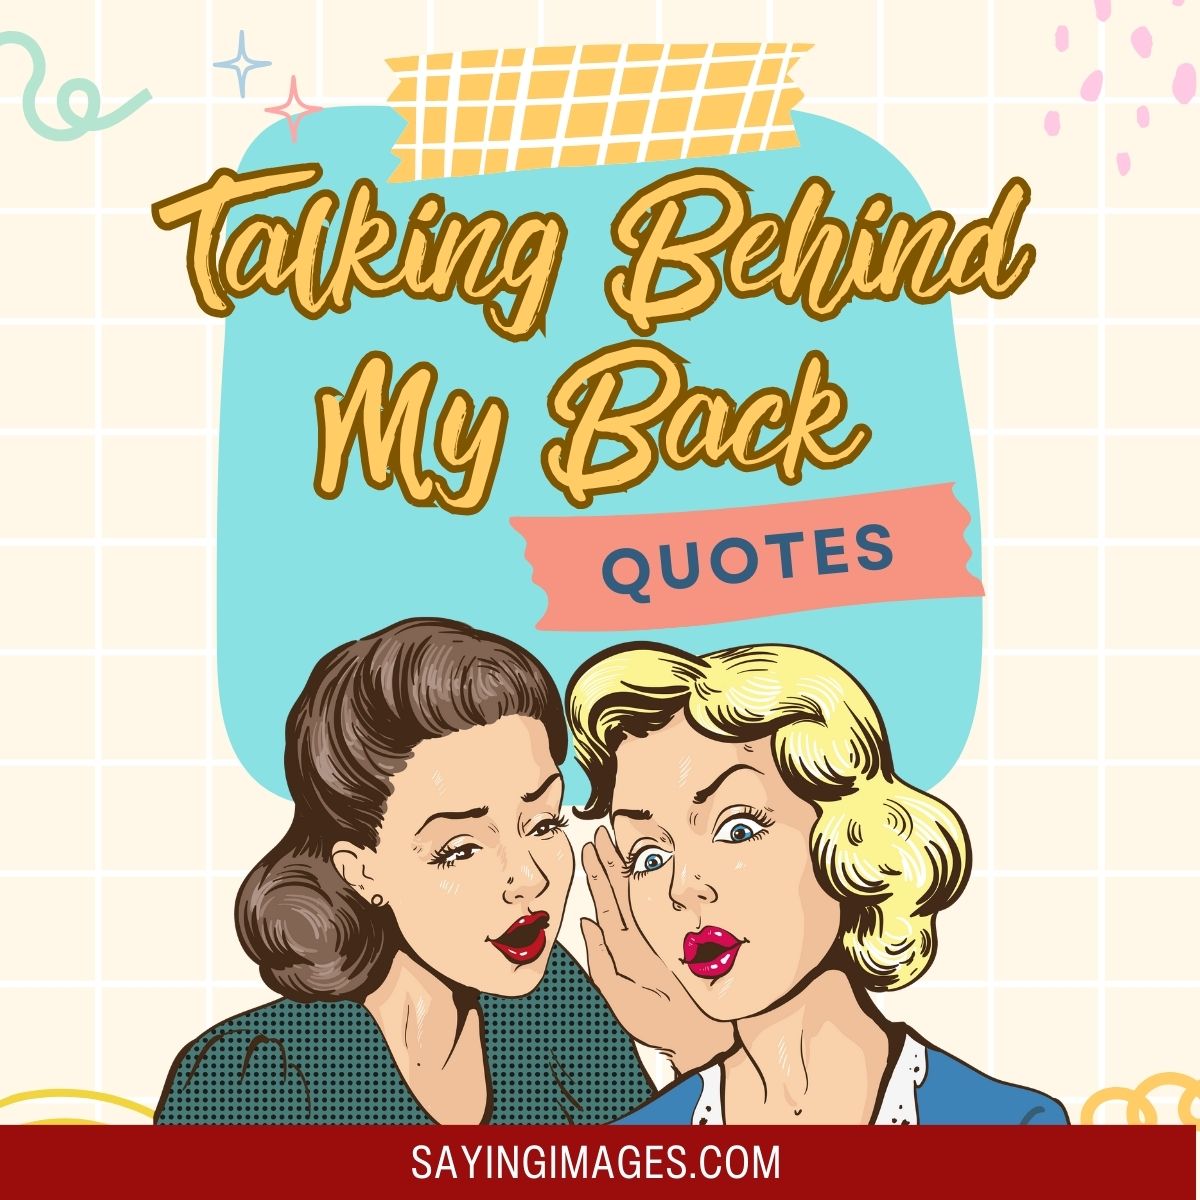 Got People Talking Behind Your Back? Read These Quotes